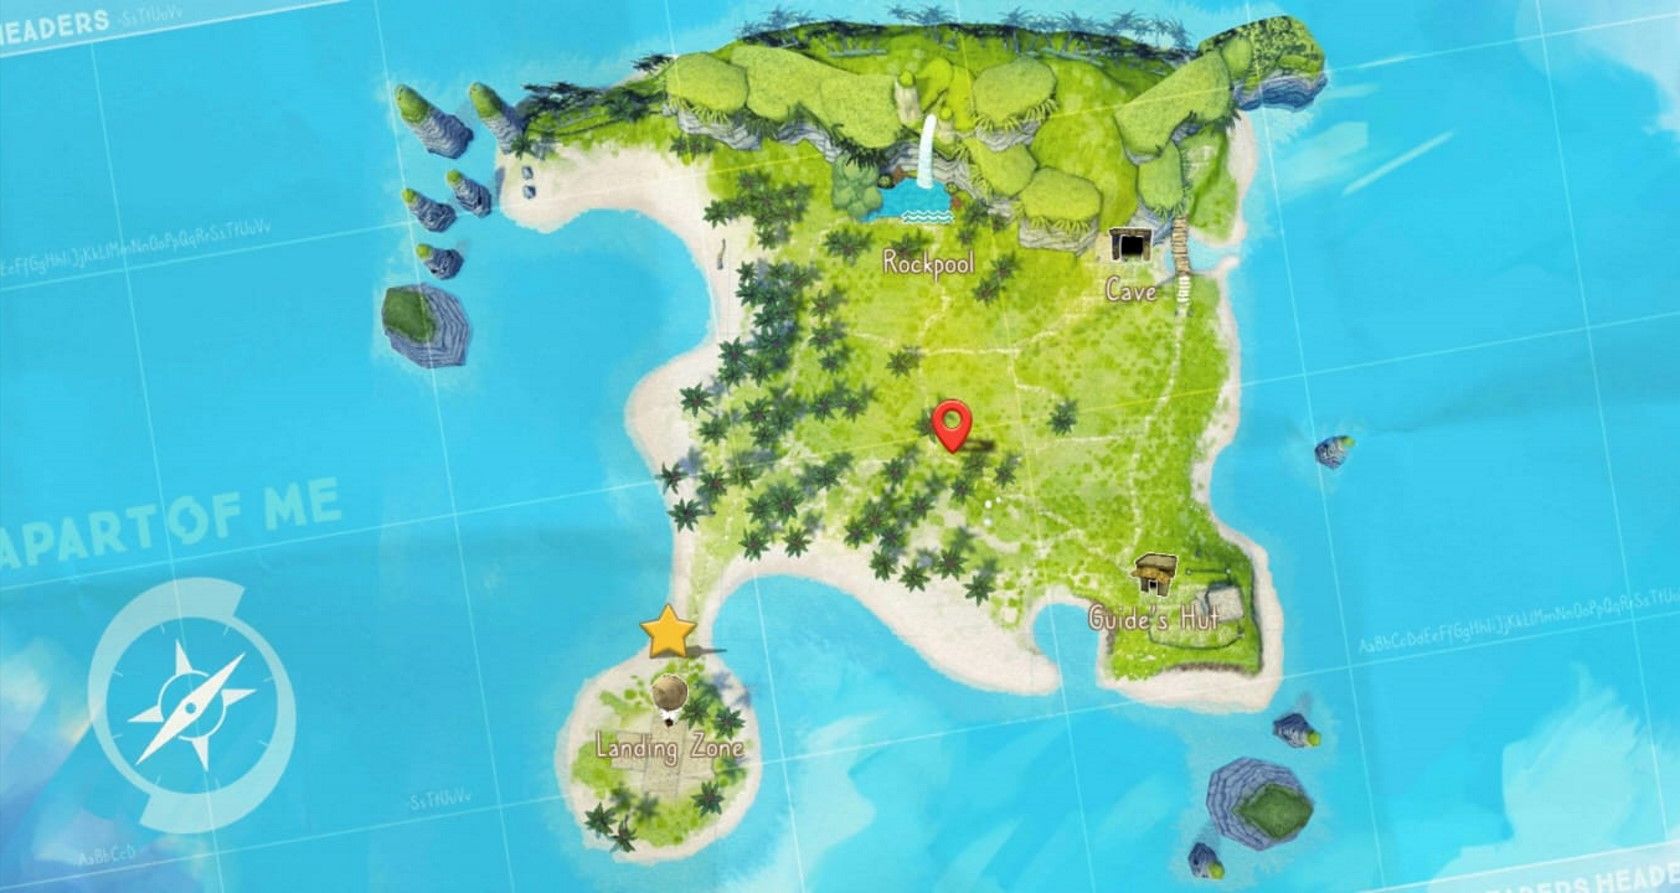 apart of me mobile game map destinations